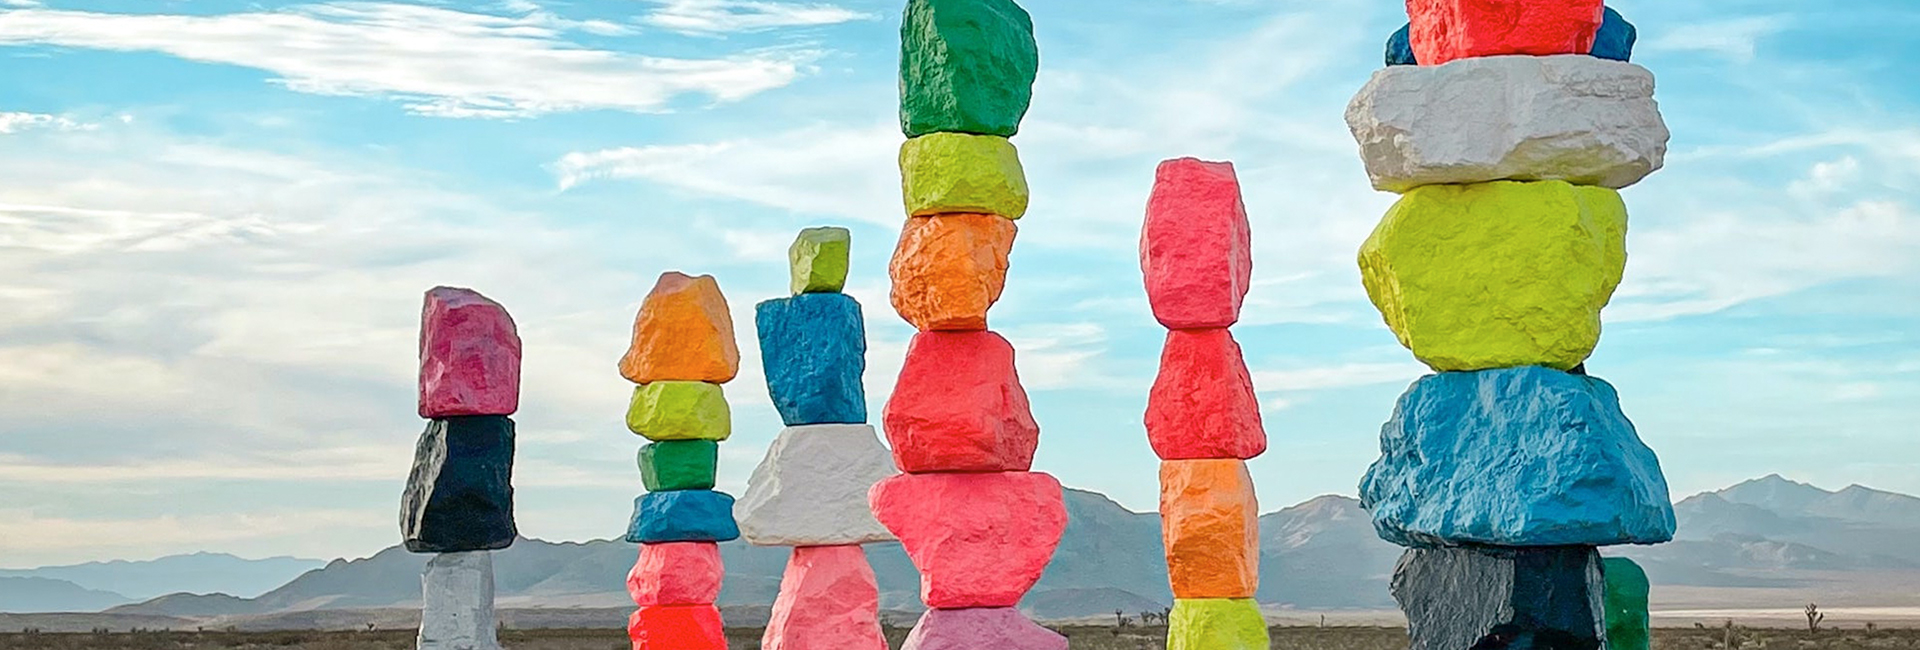 seven-magic-mountains-colorful-stacked-boulders